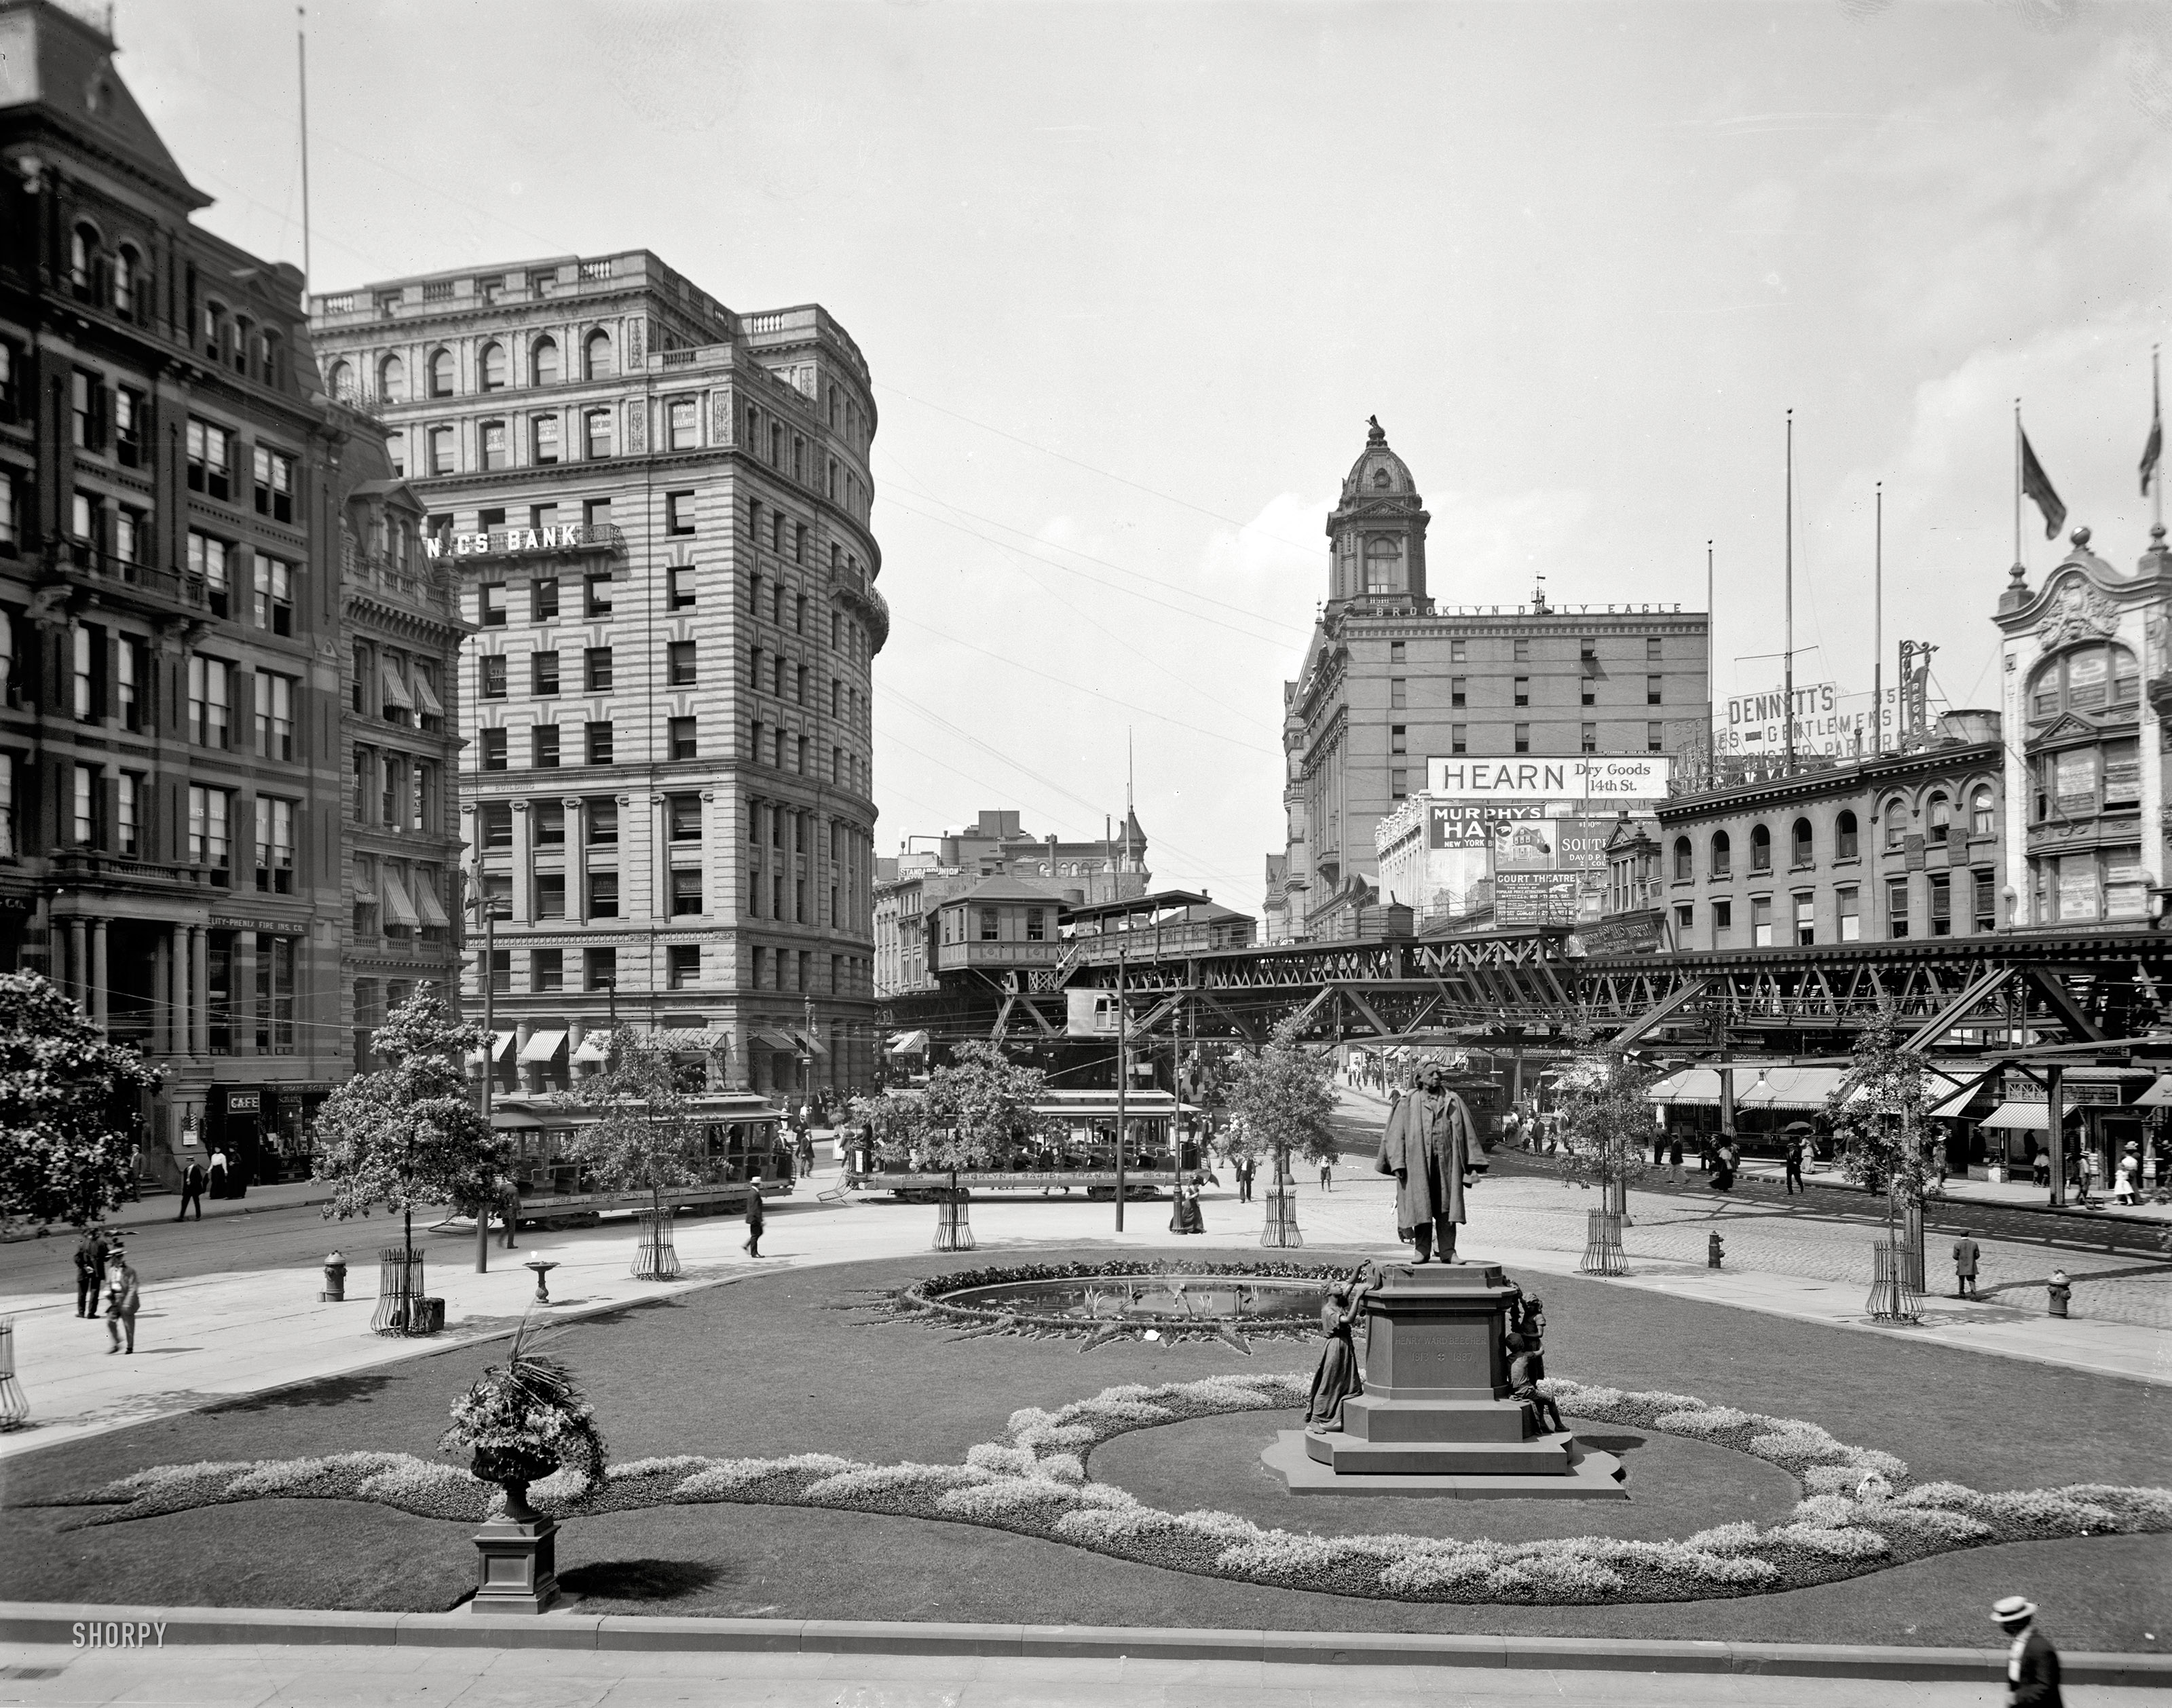 New York circa 1910. "Brooklyn. Washington Street from Fulton with Beecher statue." Now Cadman Plaza. 8x10 inch glass negative. View full size.